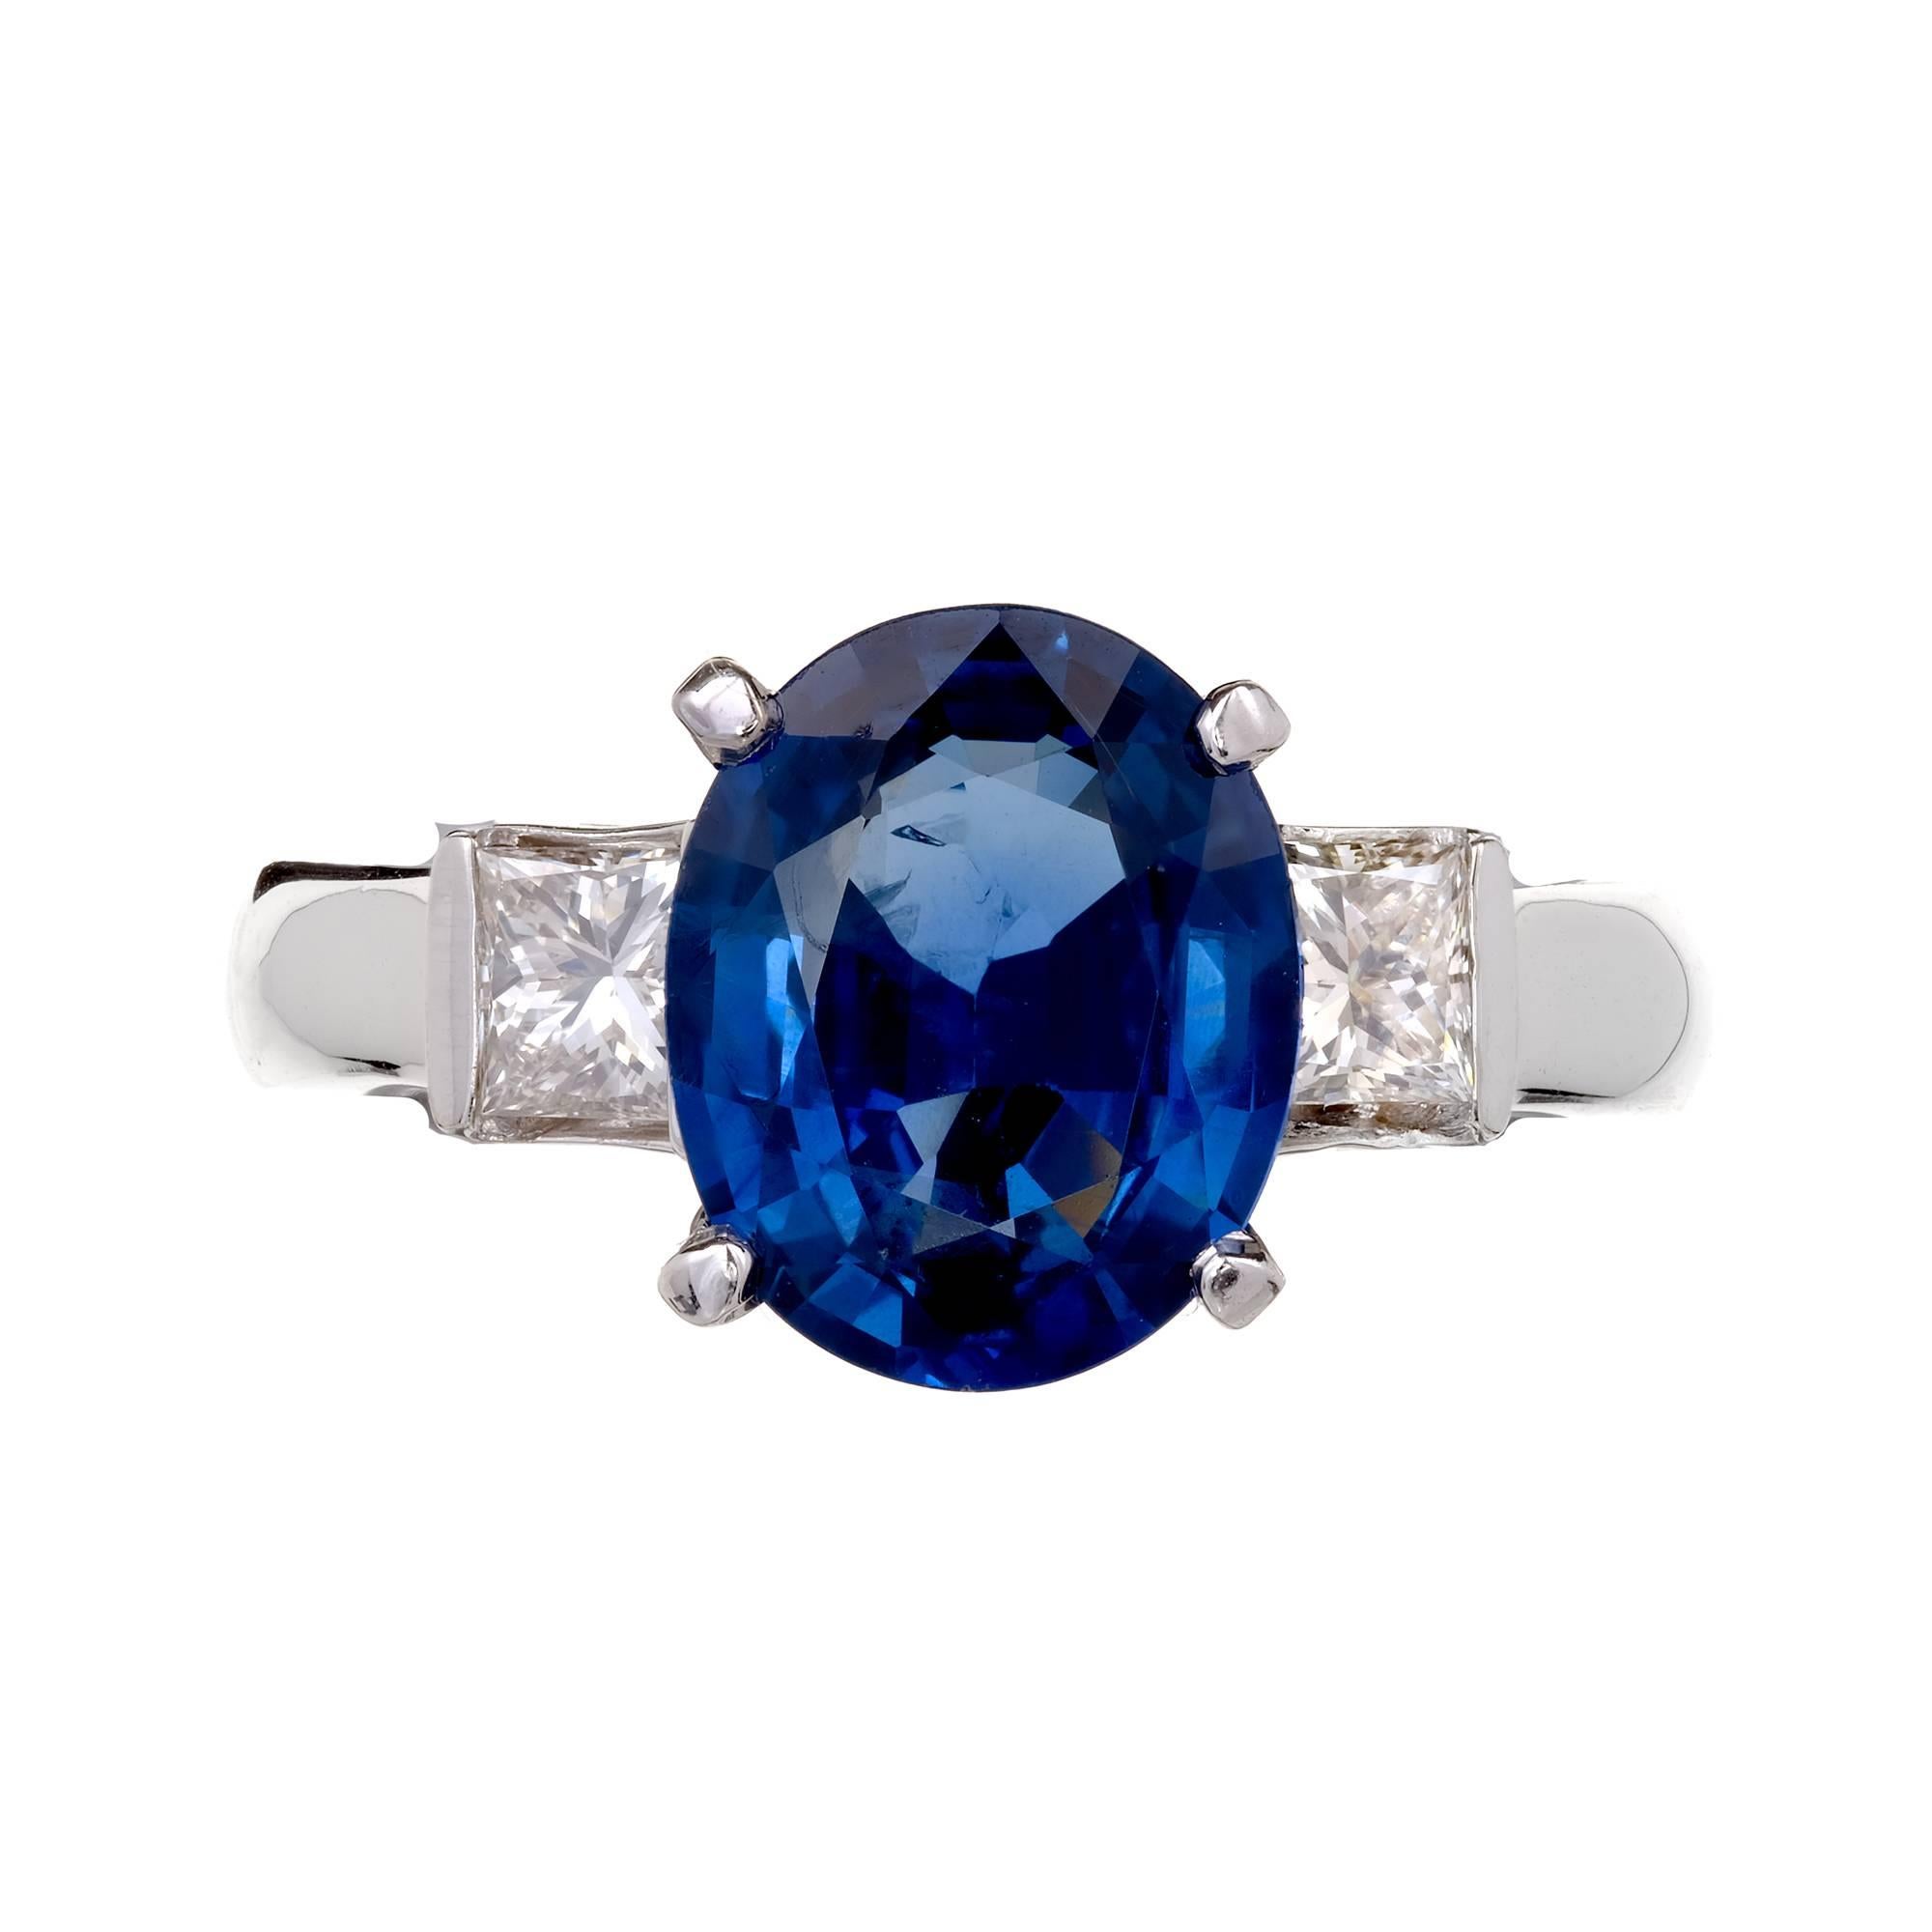 Bright blue oval Sapphire 3.04ct three-stone engagement ring with Princess cut side Diamonds in a 14k white gold setting. GIA certified natural Sapphire simple heat only. 

1 oval bright blue Sapphire, approx. total weight 3.04cts, SI1, 3.53 x